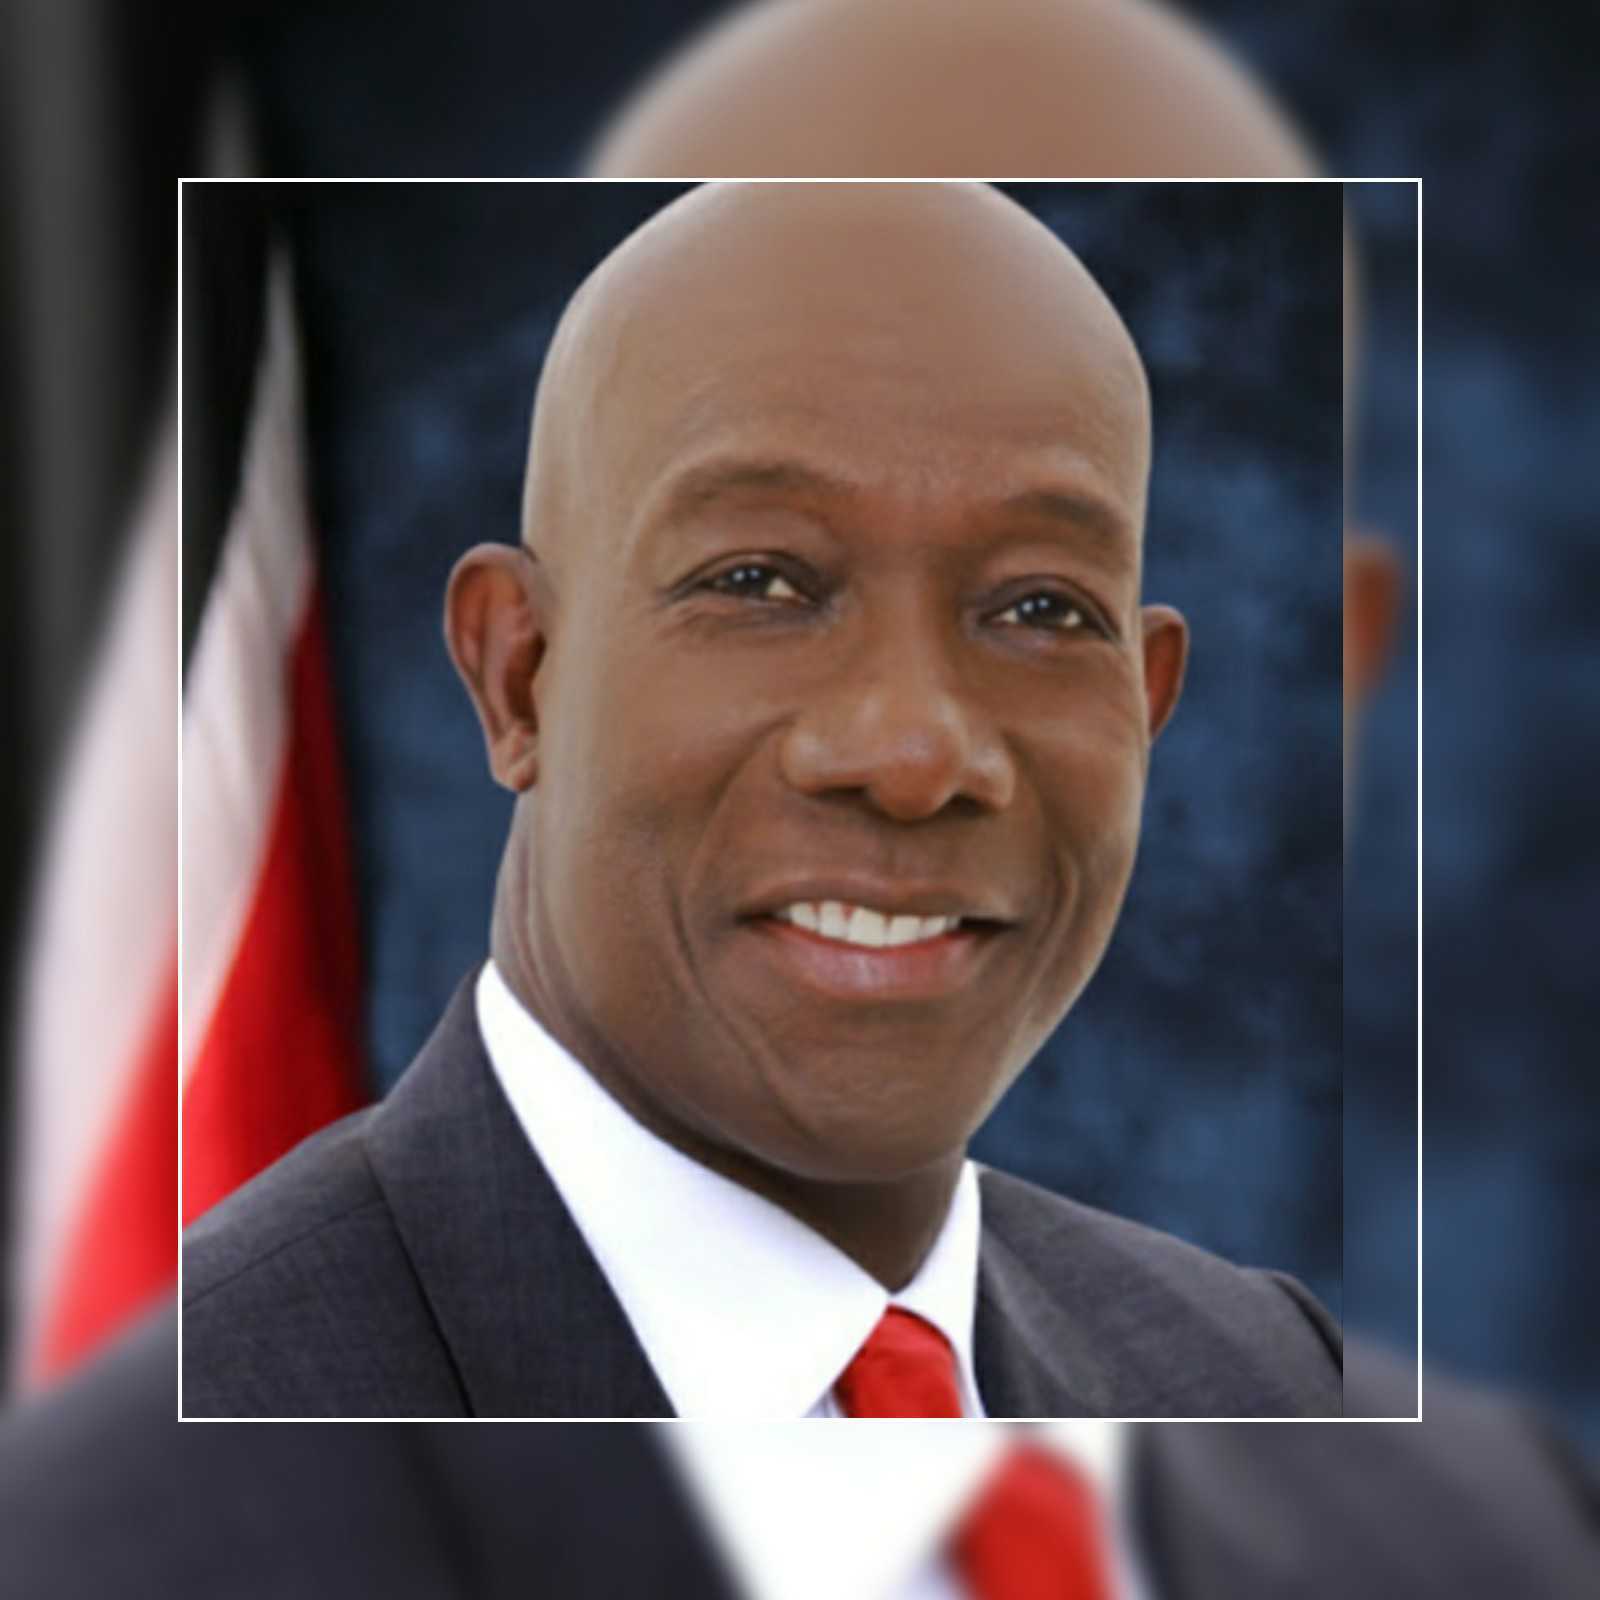 NEW YEAR STATEMENT BY THE INCOMING CHAIRMAN OF THE CARIBBEAN COMMUNITY (CARICOM) DR THE HONOURABLE KEITH ROWLEY PRIME MINISTER OF TRINIDAD AND TOBAGO